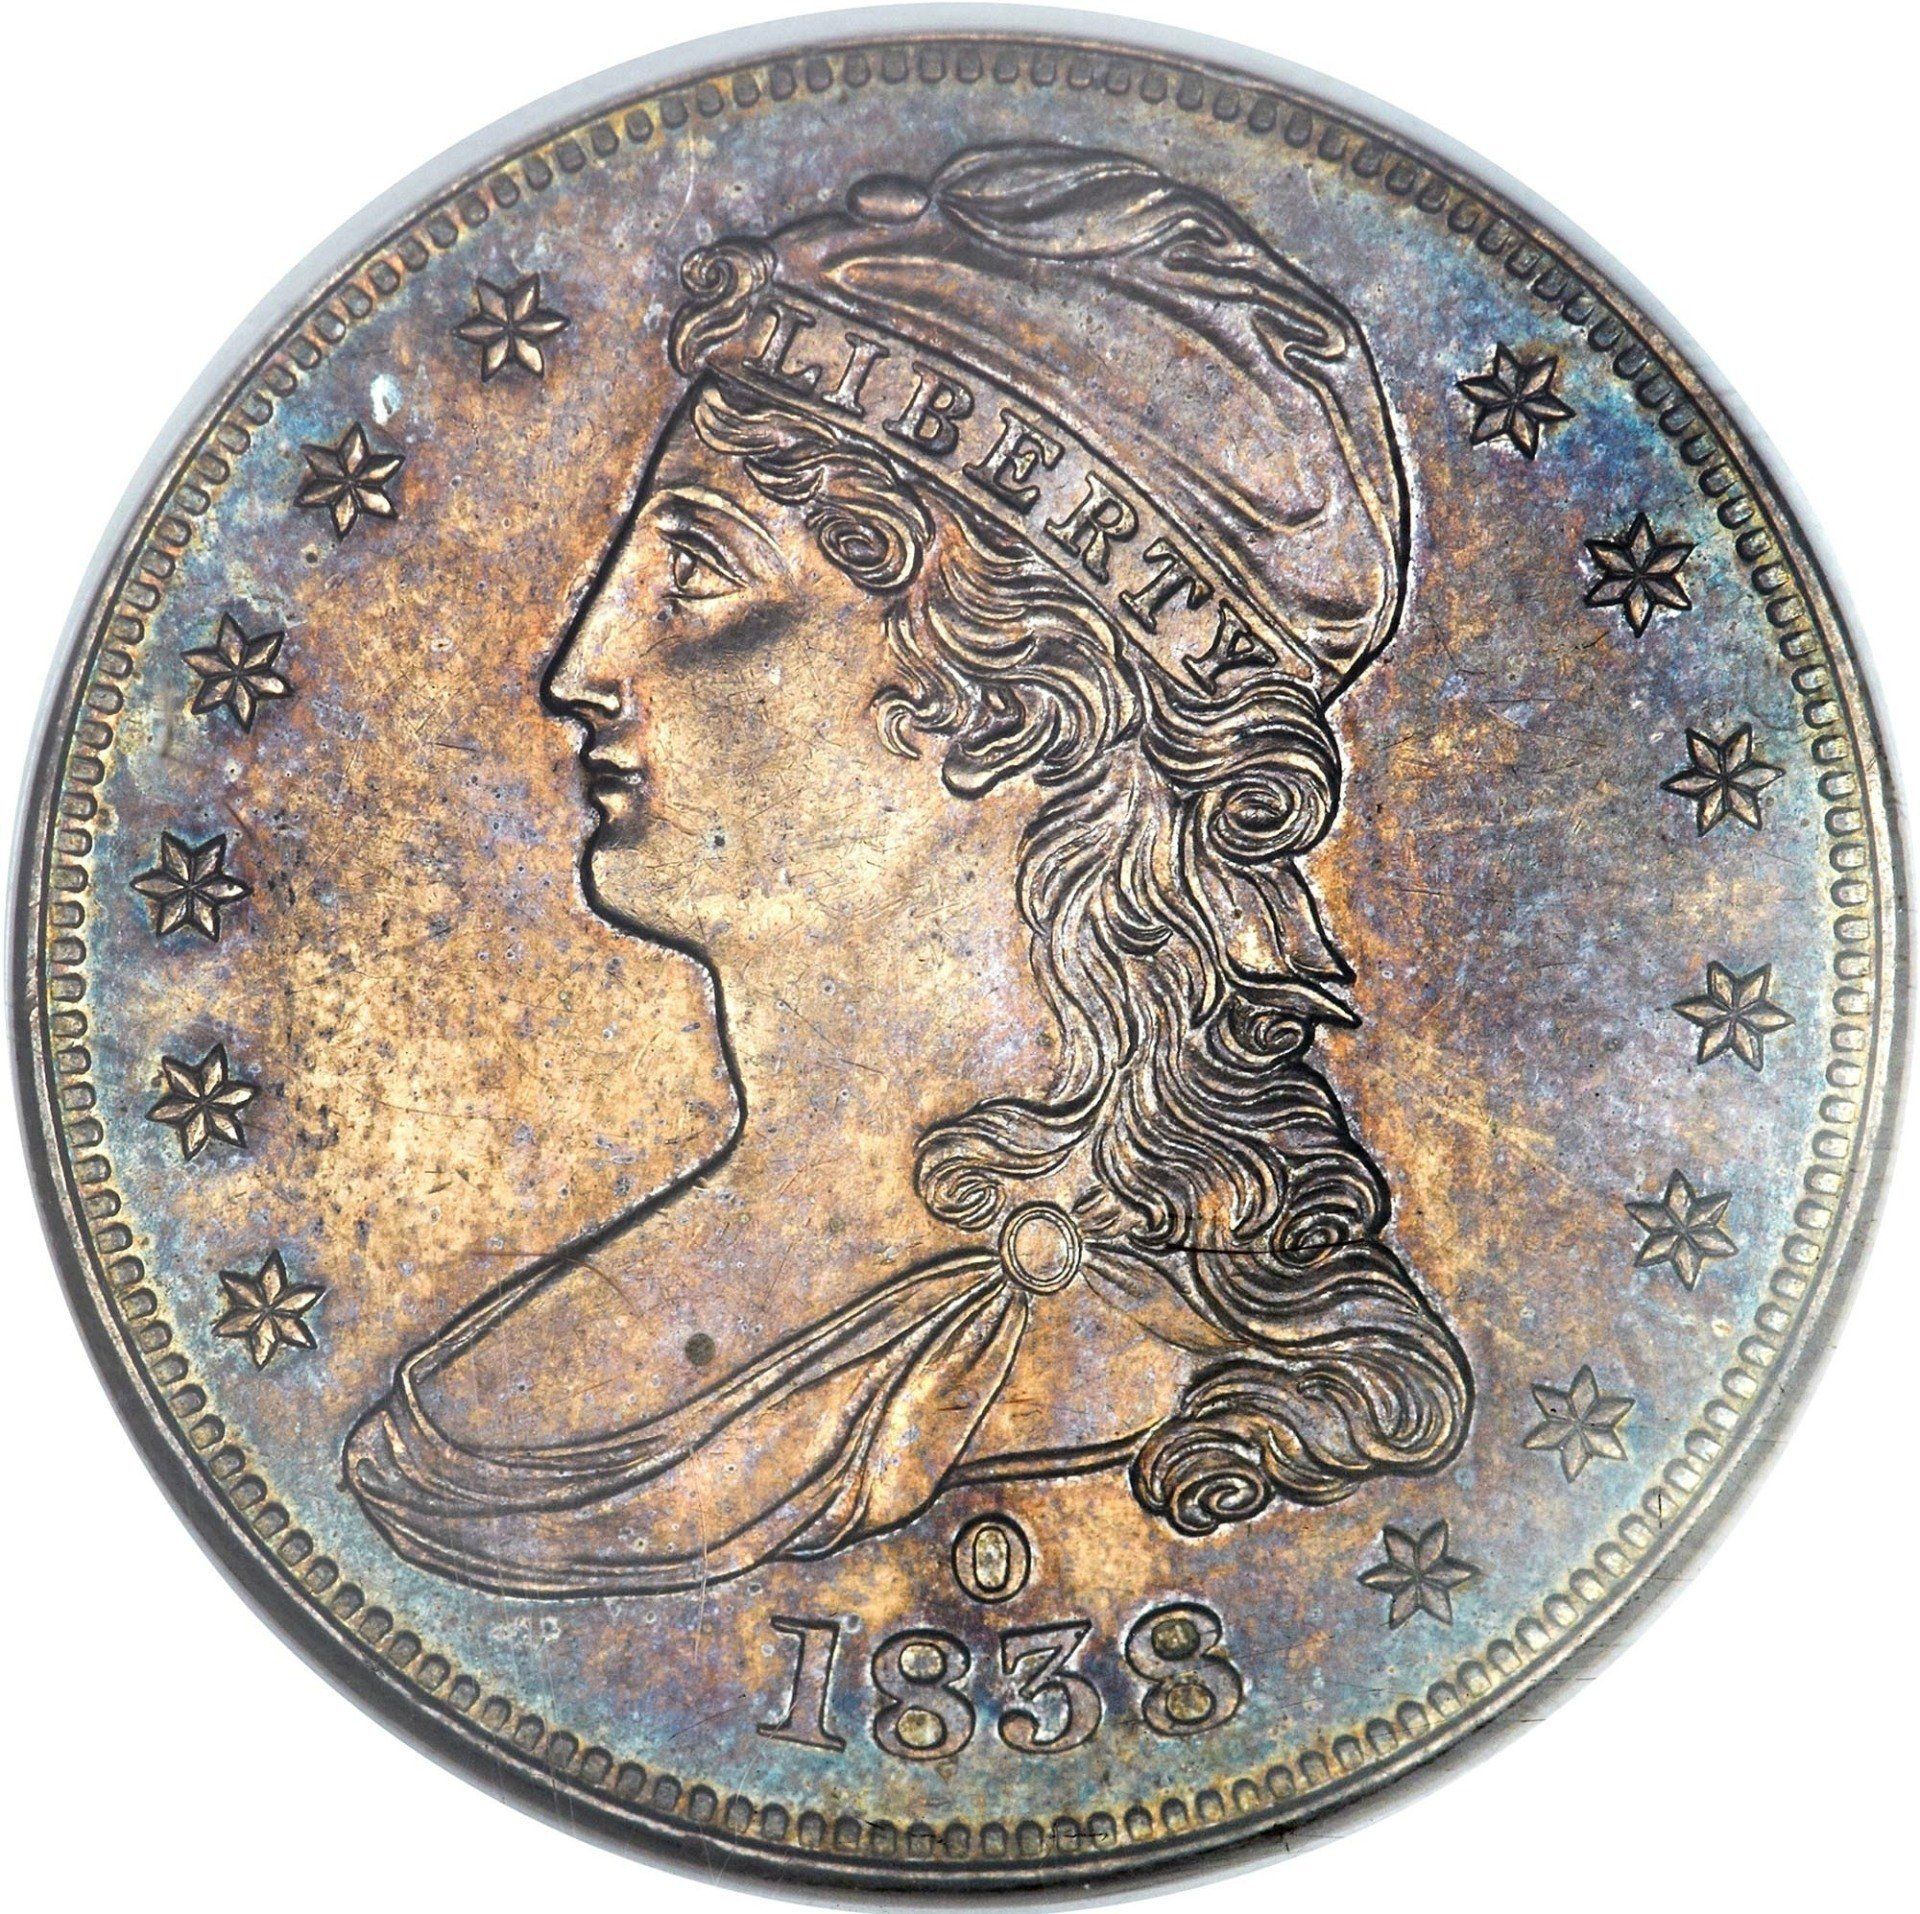 1838 O capped bust half dollar proof - Image courtesy of NGC